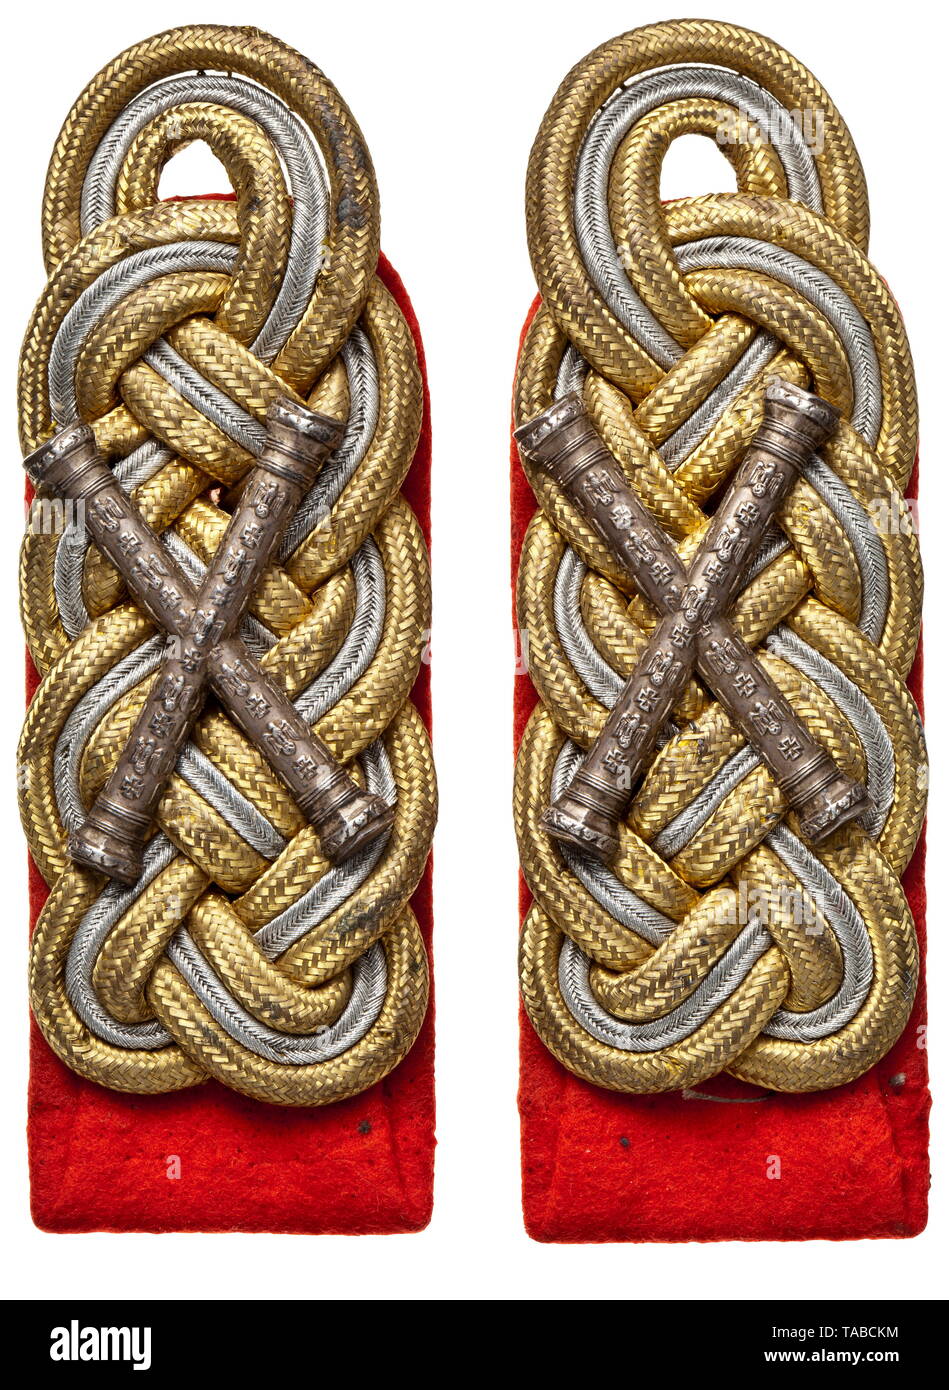 Generalfeldmarschall Maximilian von Weichs (1881 - 1954) - a pair of shoulder boards and further personal items Shou 20th century, Editorial-Use-Only Stock Photo